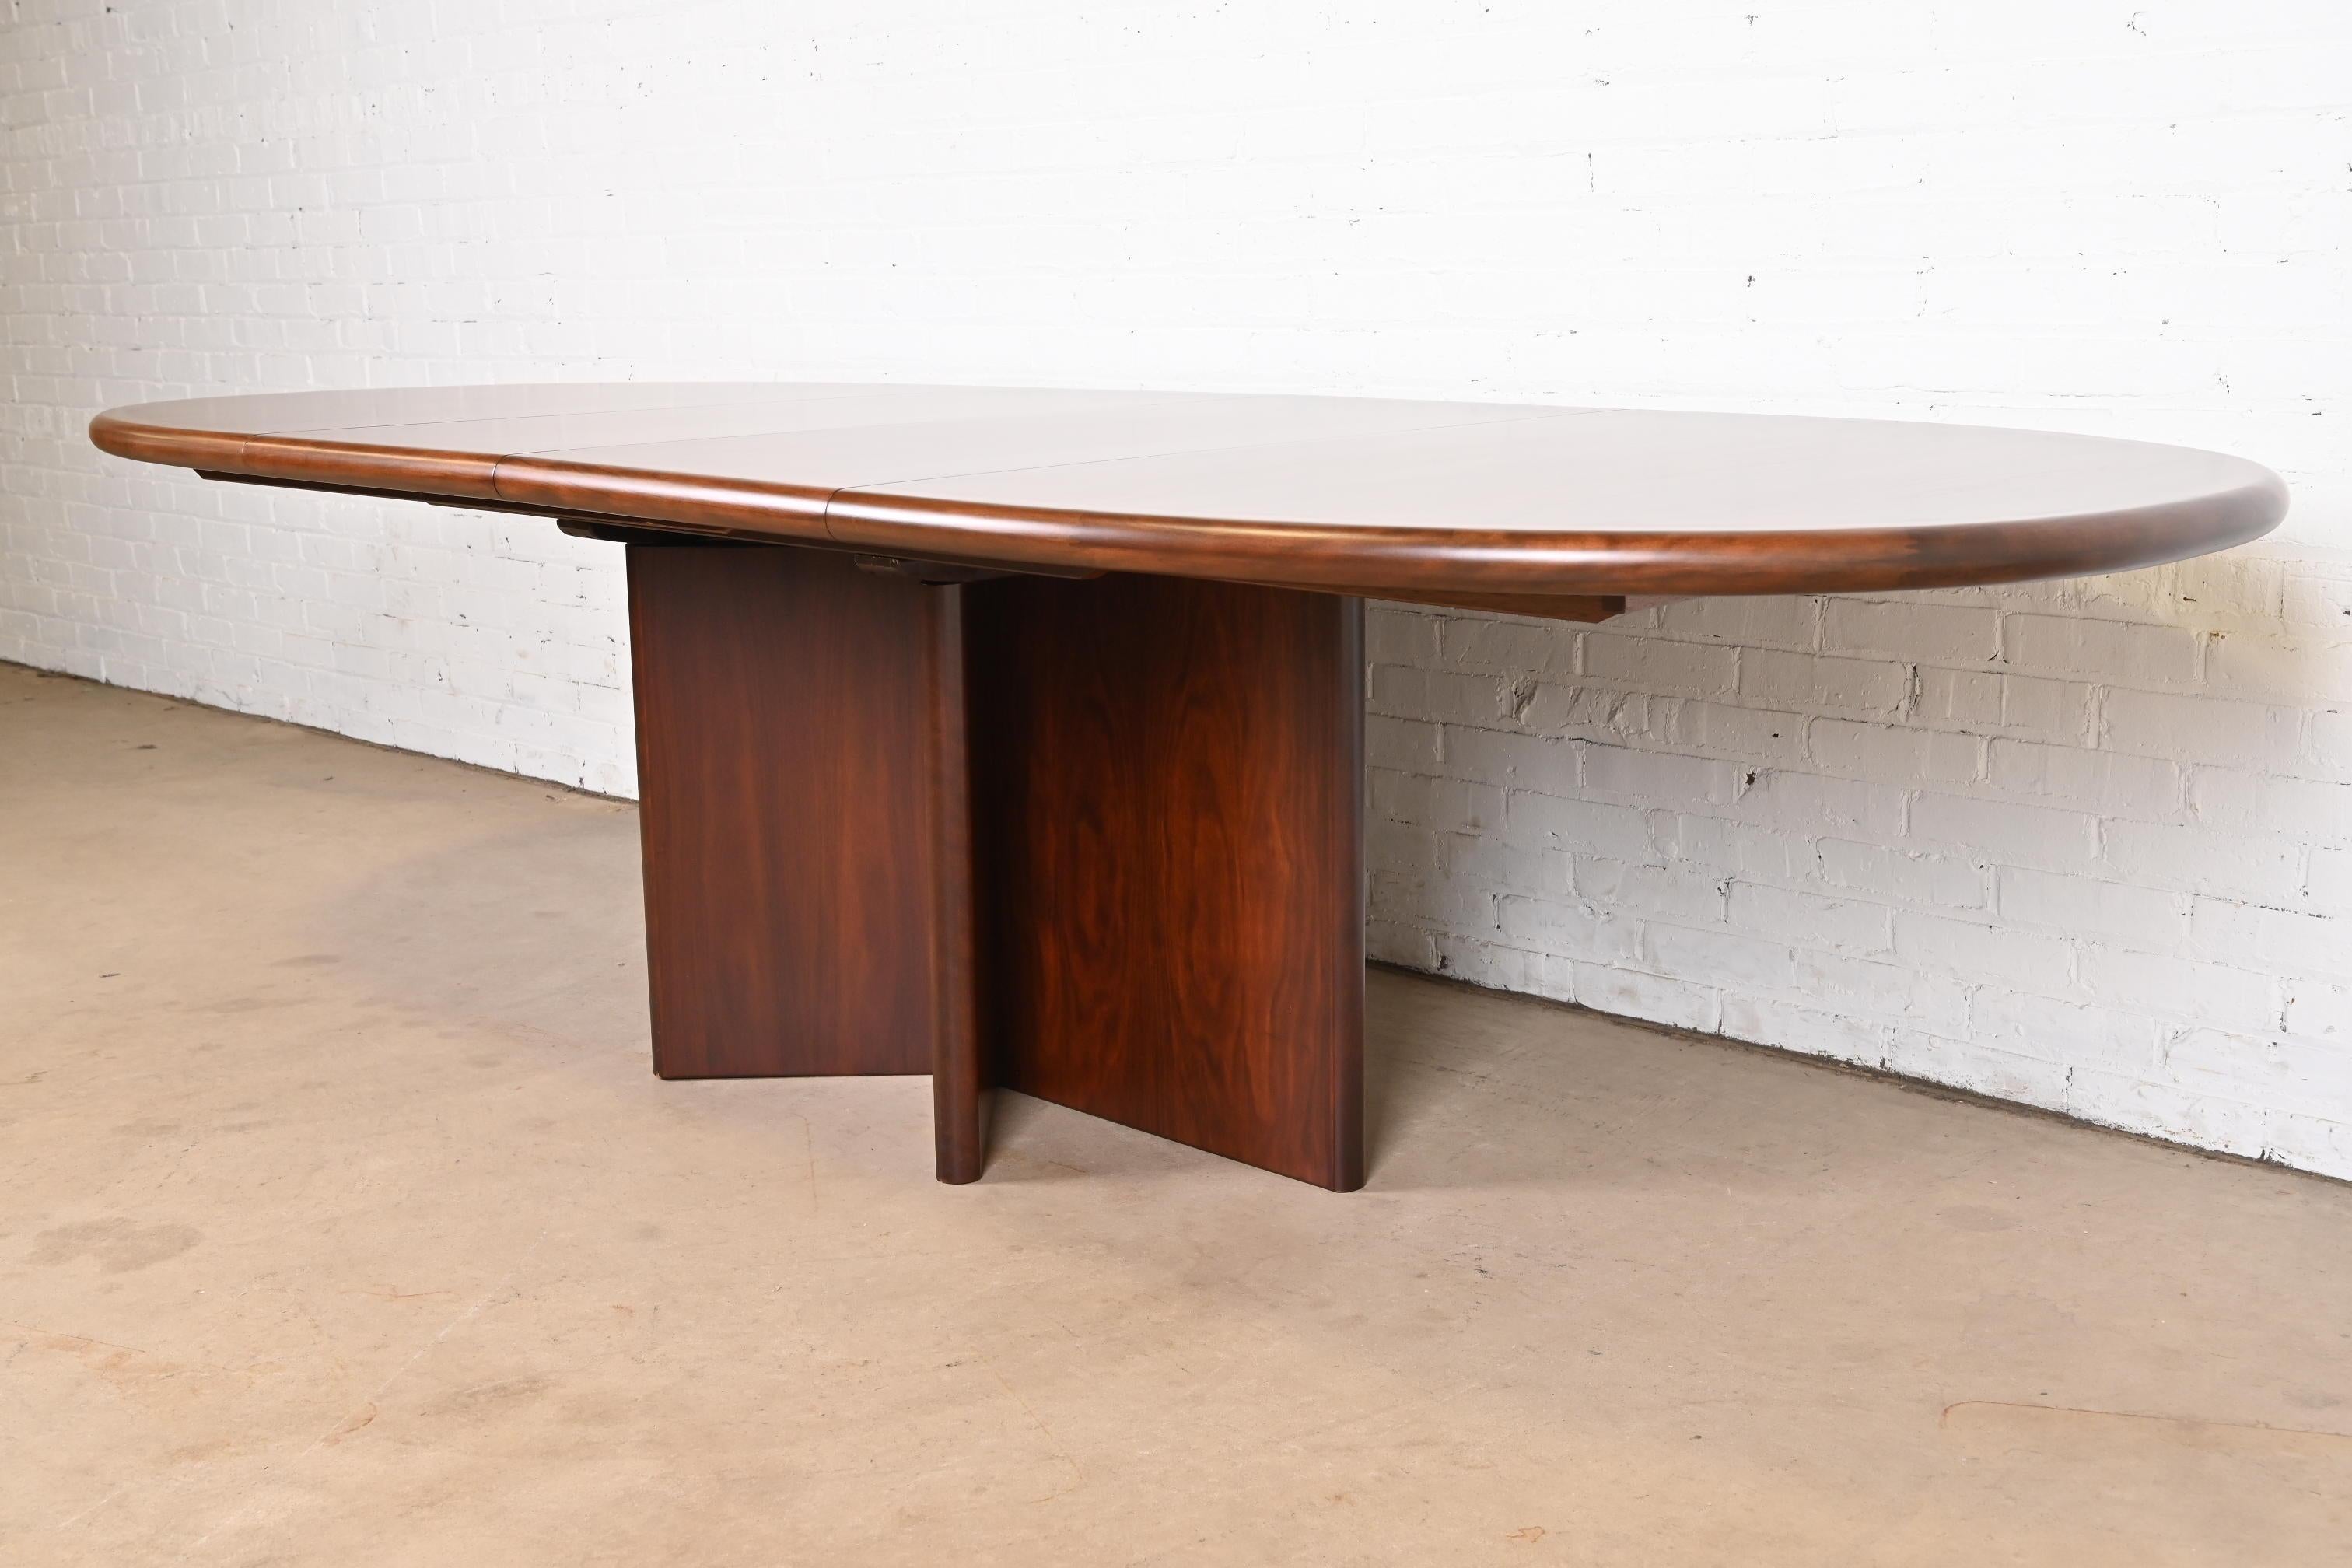 Mid-20th Century Danish Modern Rosewood Pedestal Dining Table by Ansager Mobler, Newly Refinished